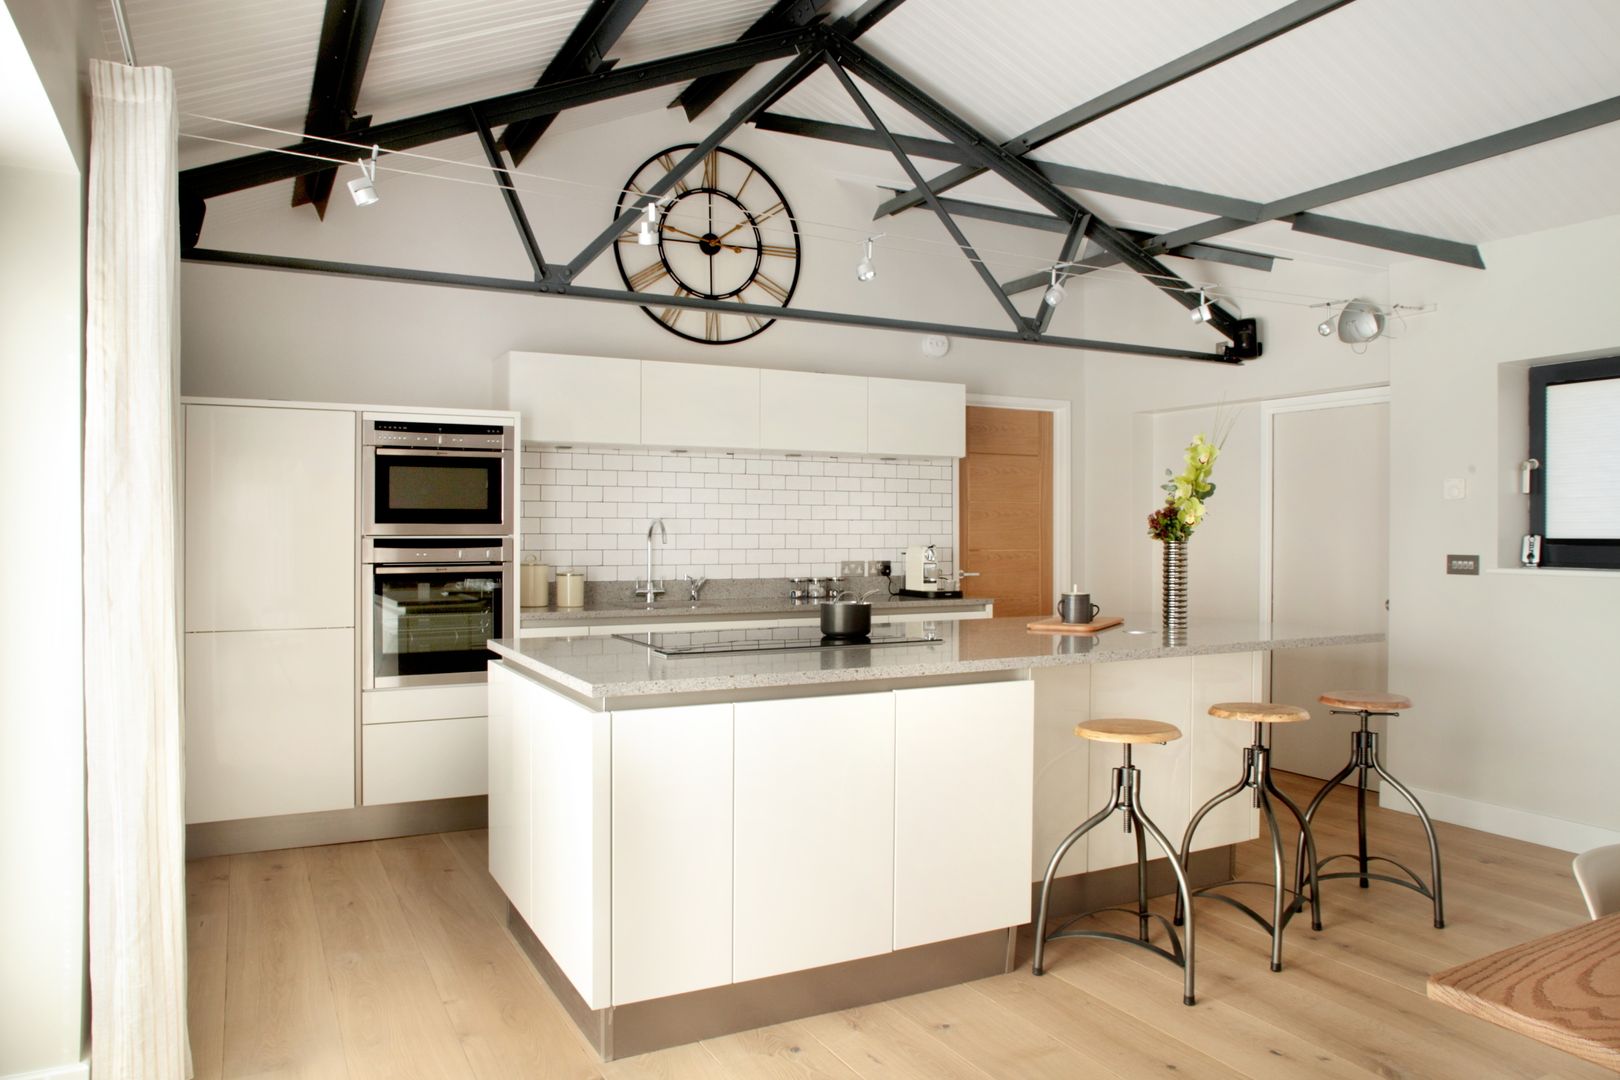 The Cow Shed Barn Conversion Kitchen in-toto Kitchens Design Studio Marlow Dapur Klasik